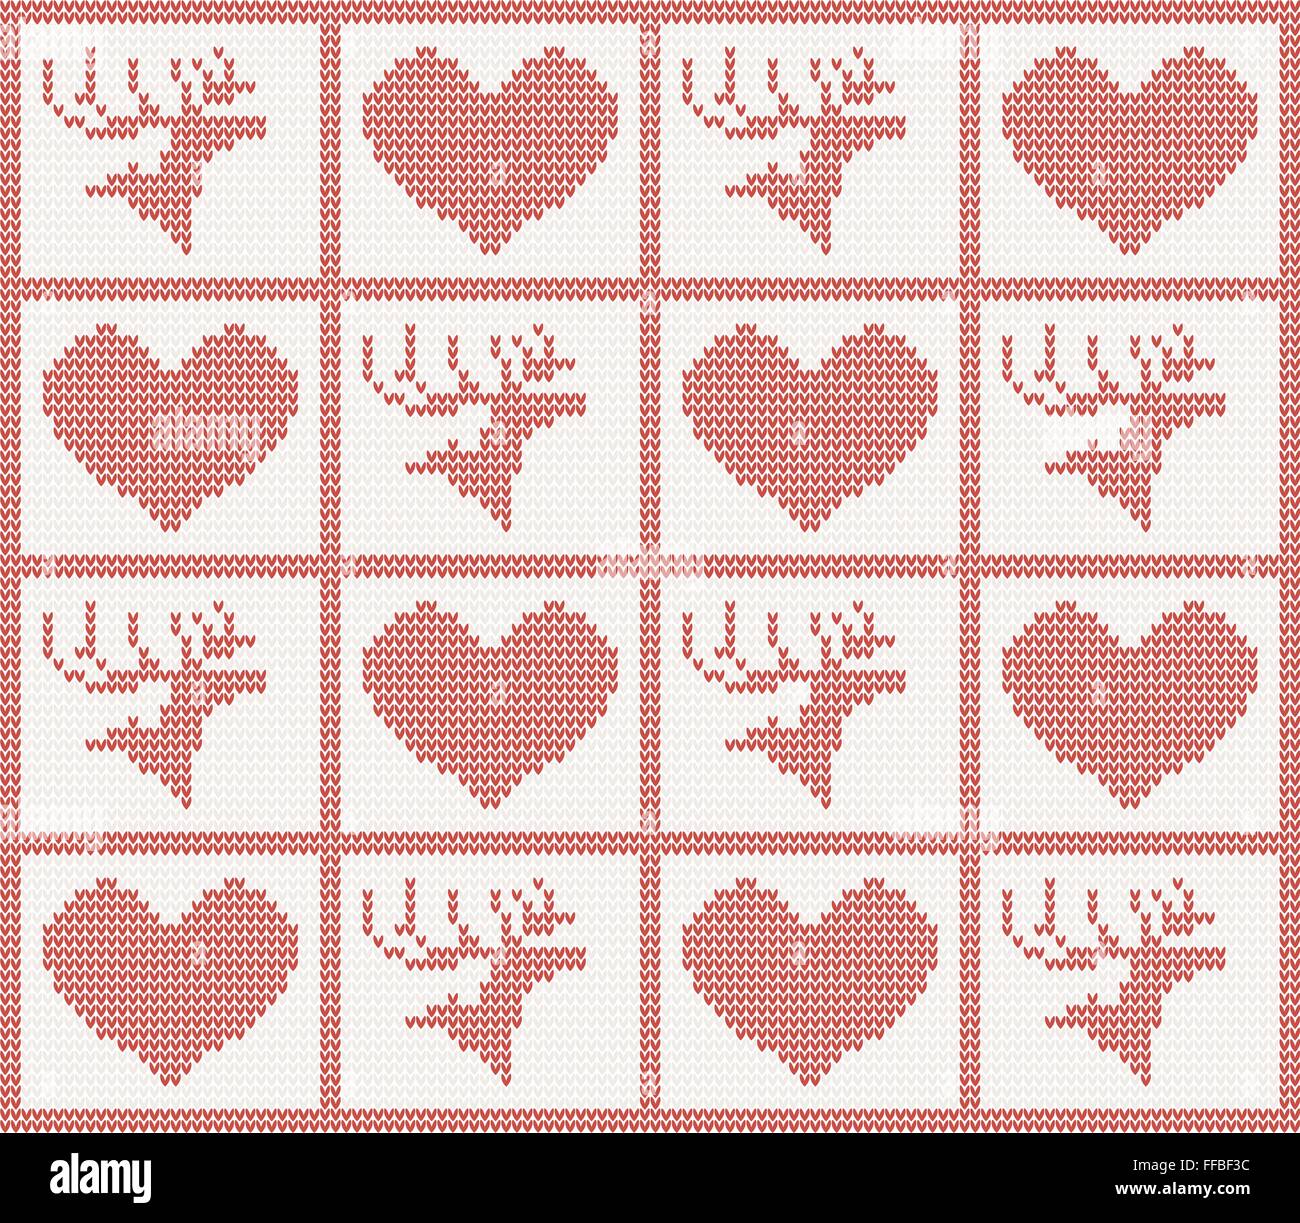 knitted pattern with hearts and deers. vector illustration Stock Vector